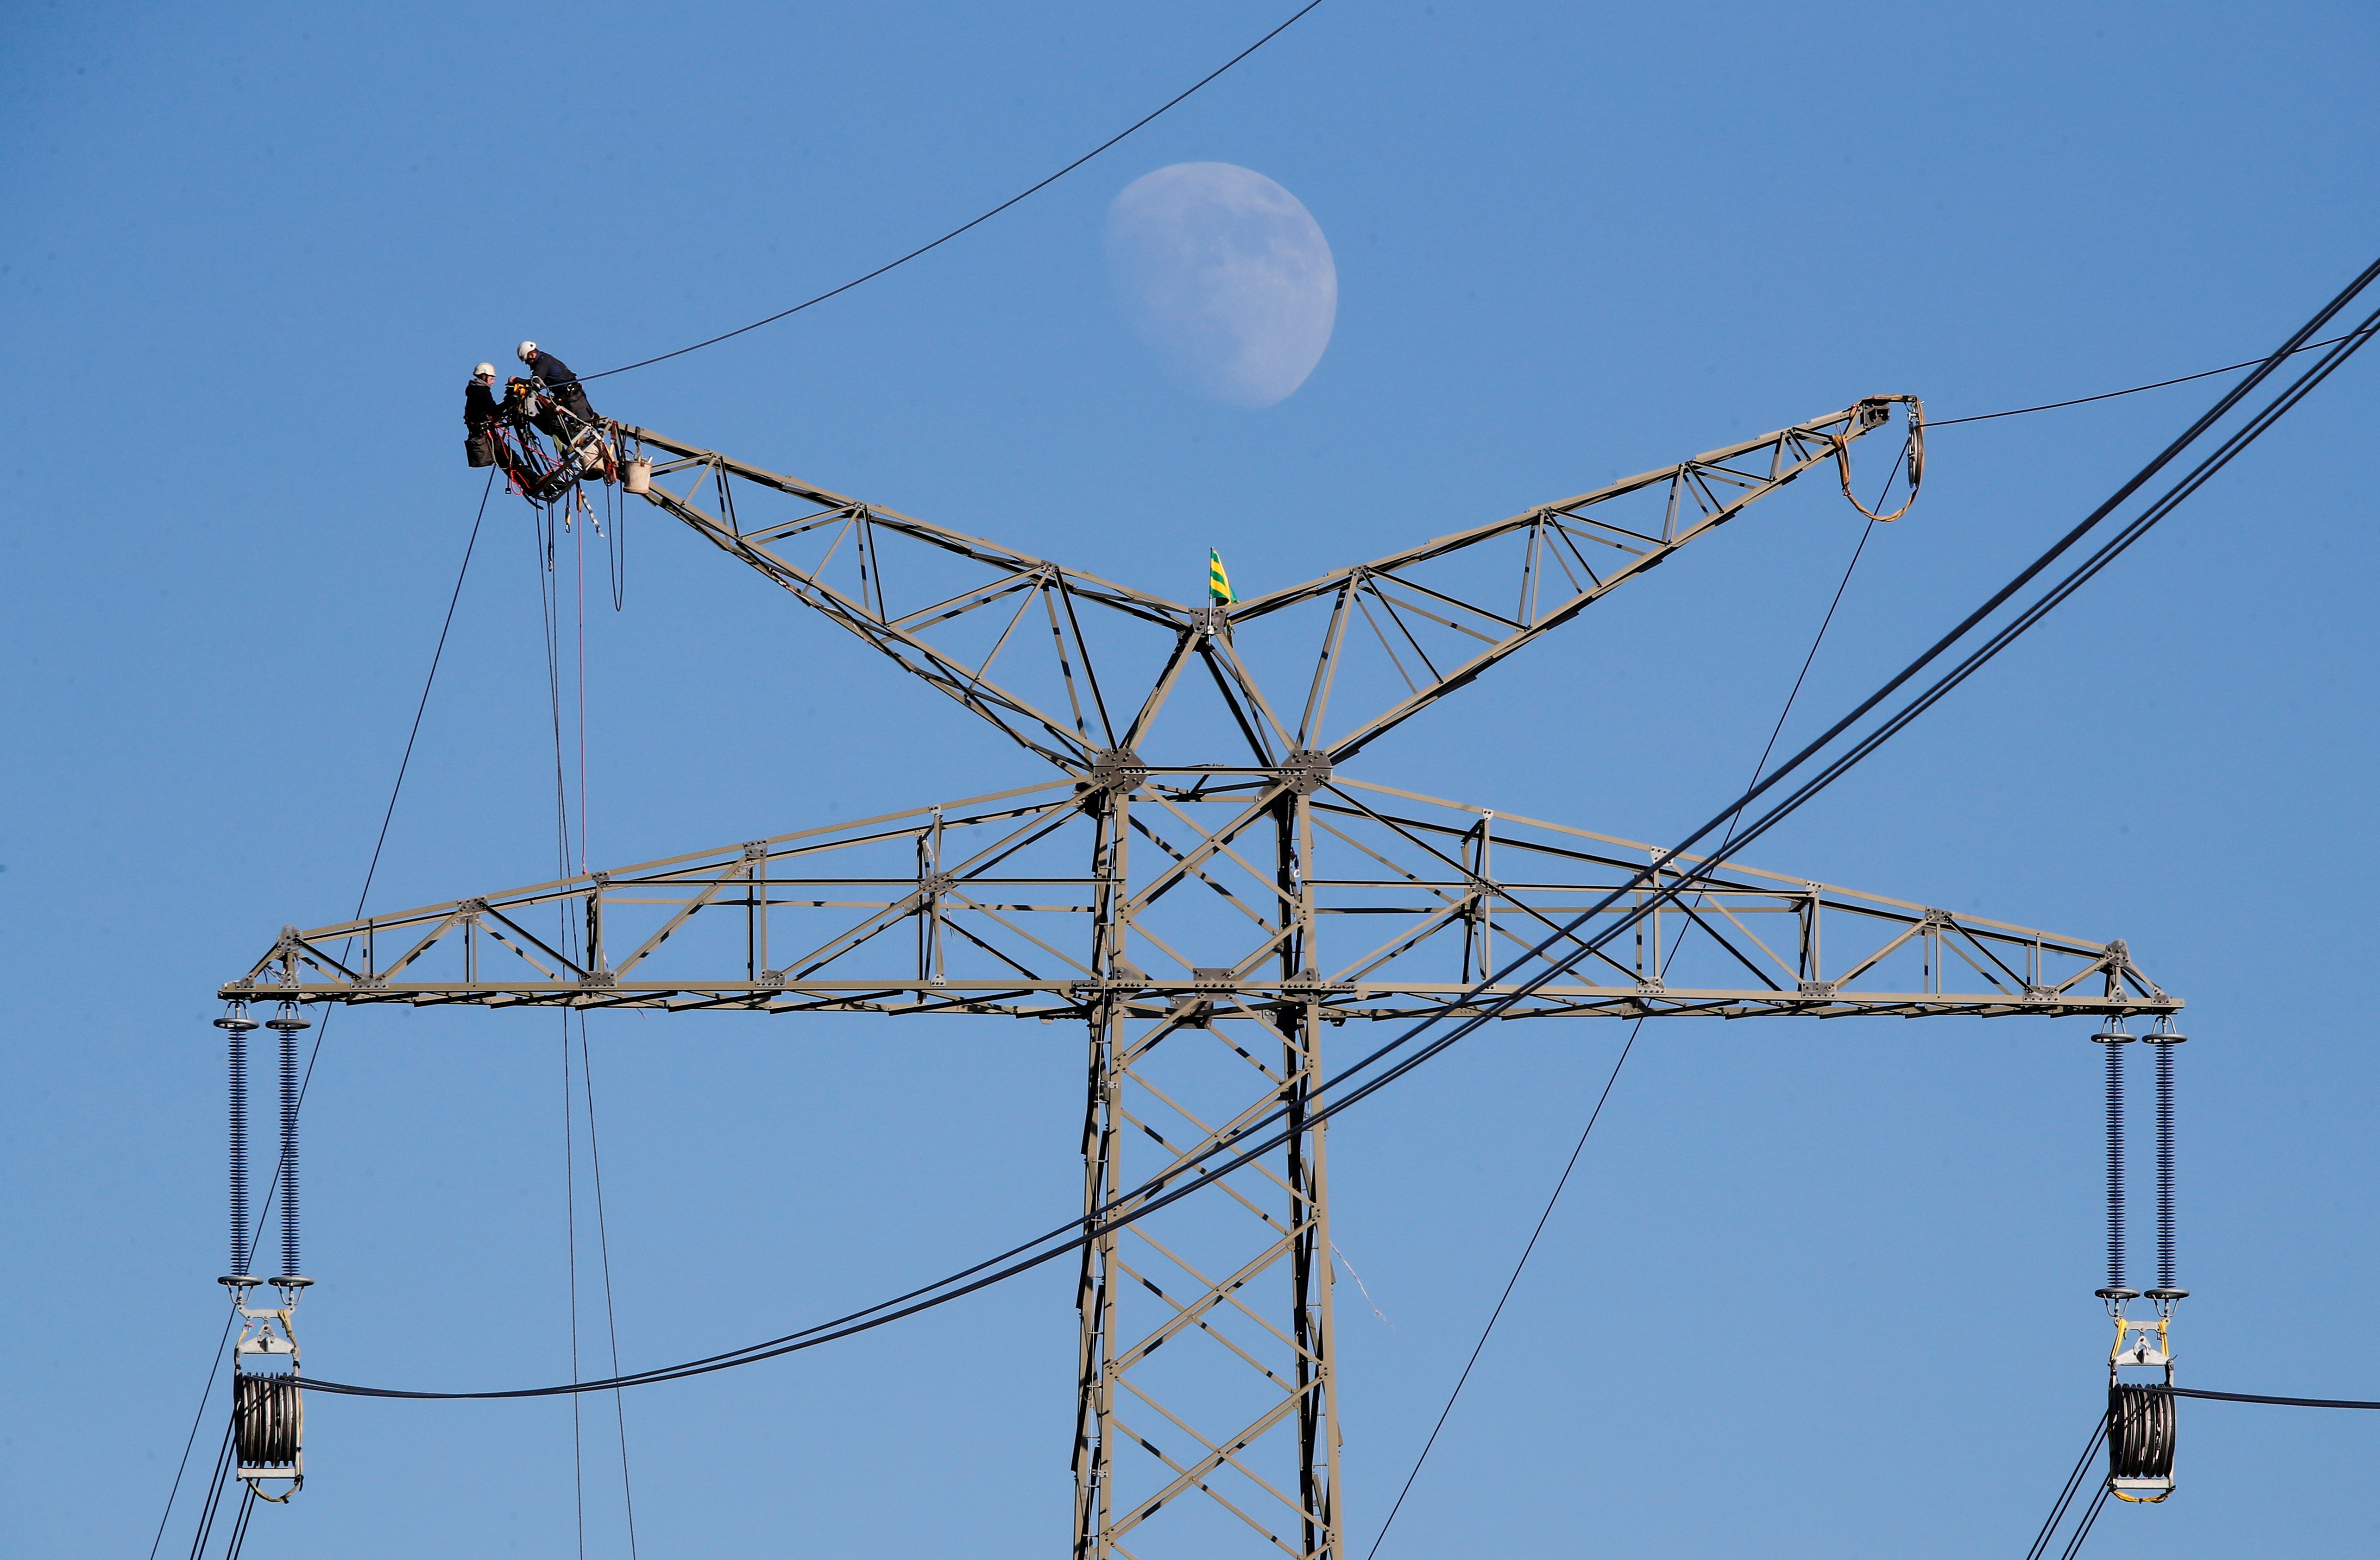 The moon rises as electricians work atop a power pole near the lignite power plant of Neurath of German energy supplier and utility RWE, near Rommerskirchen north-west of Cologne, Germany, February 5, 2020.    REUTERS/Wolfgang Rattay//File Photo